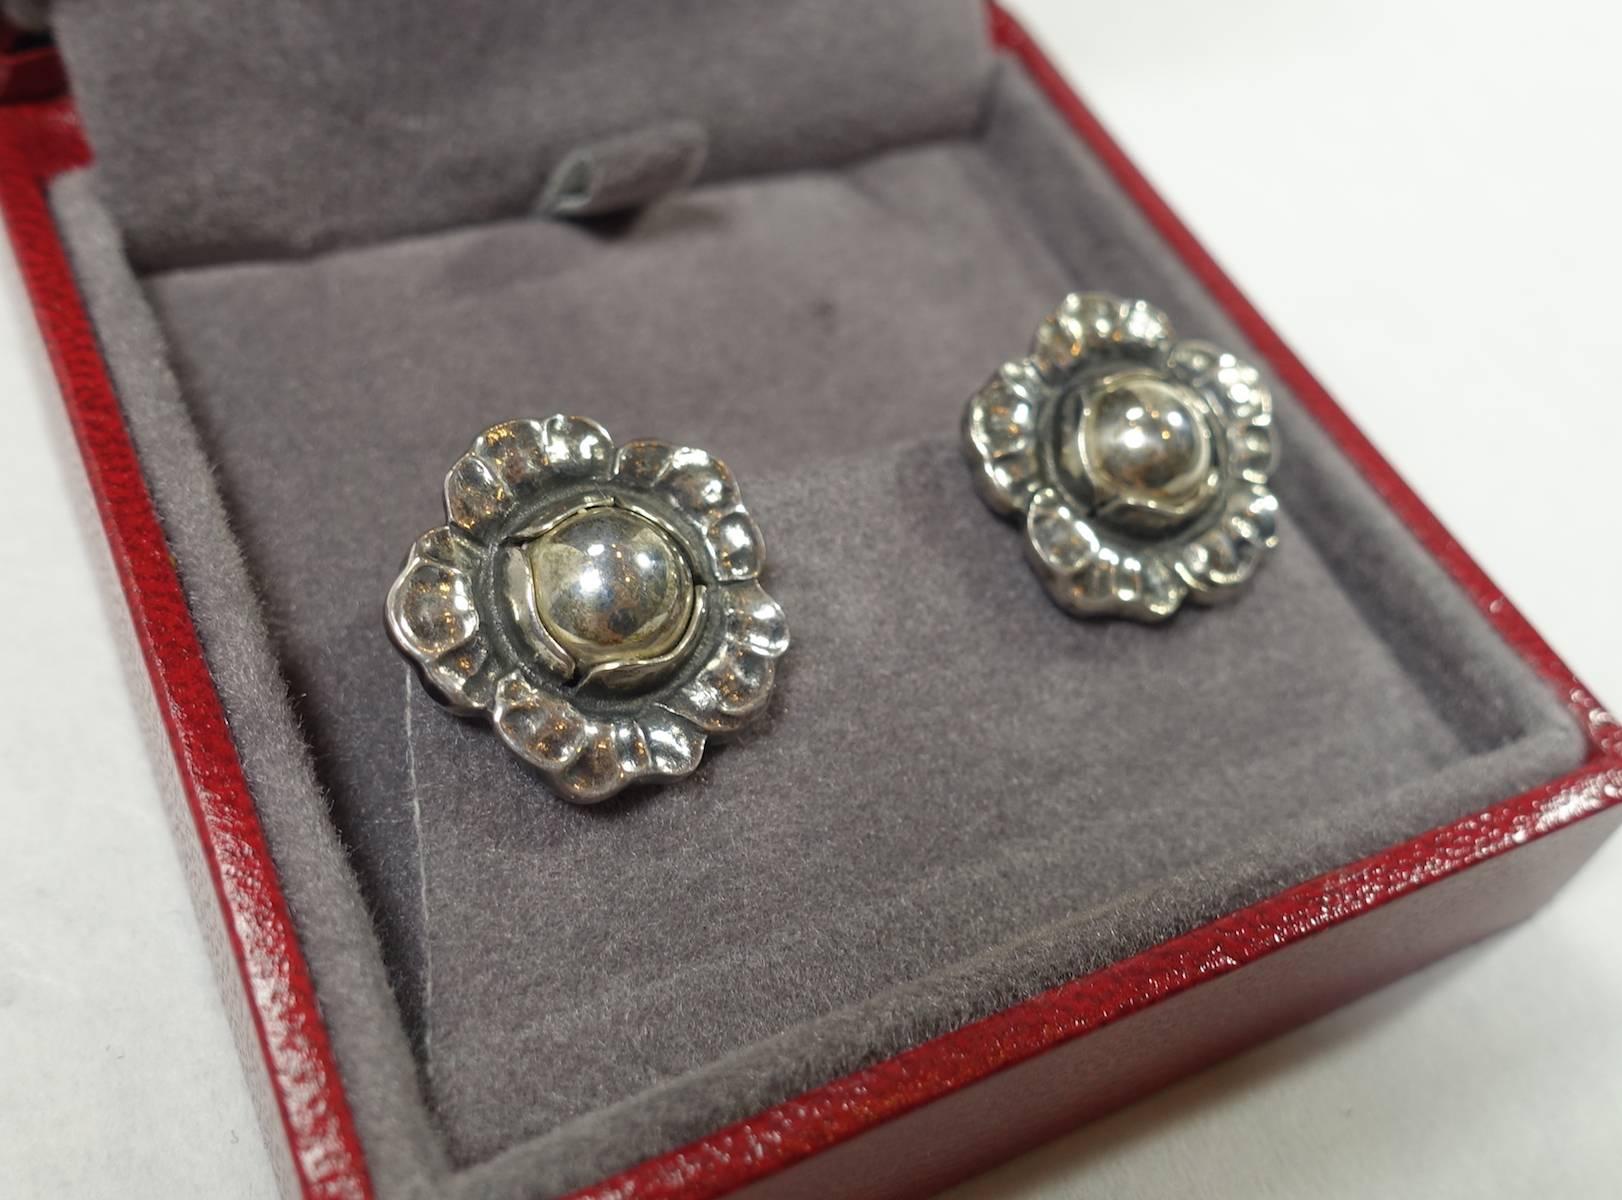 These vintage signed Georg Jensen earrings feature a floral design in a sterling silver setting.  In excellent condition, these clip earrings have a 3/4” diameter, are signed “Georg Jensen 2002 925 Denmark”.